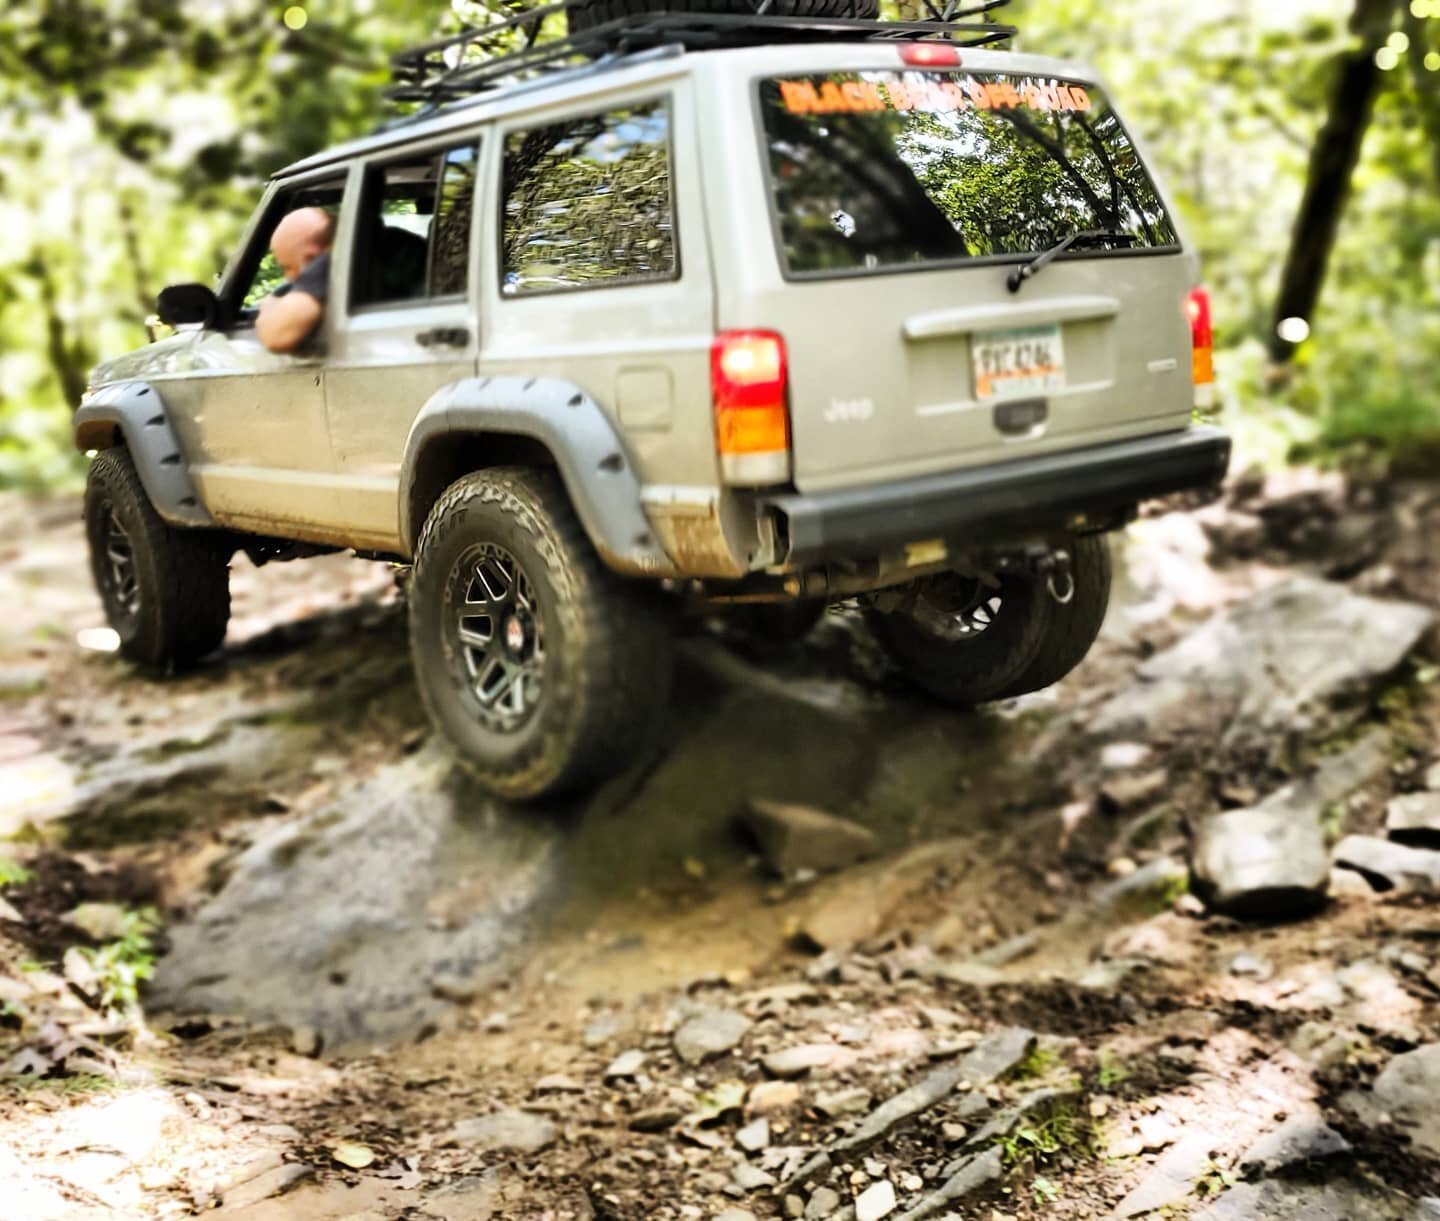 The week is a blur and we are headed into the weekend full steam ahead! 

□ □ : @clydesdale_sser 

#jeepxj #jeepend #jeeplife #jeepcherokee #blackbearbuilt